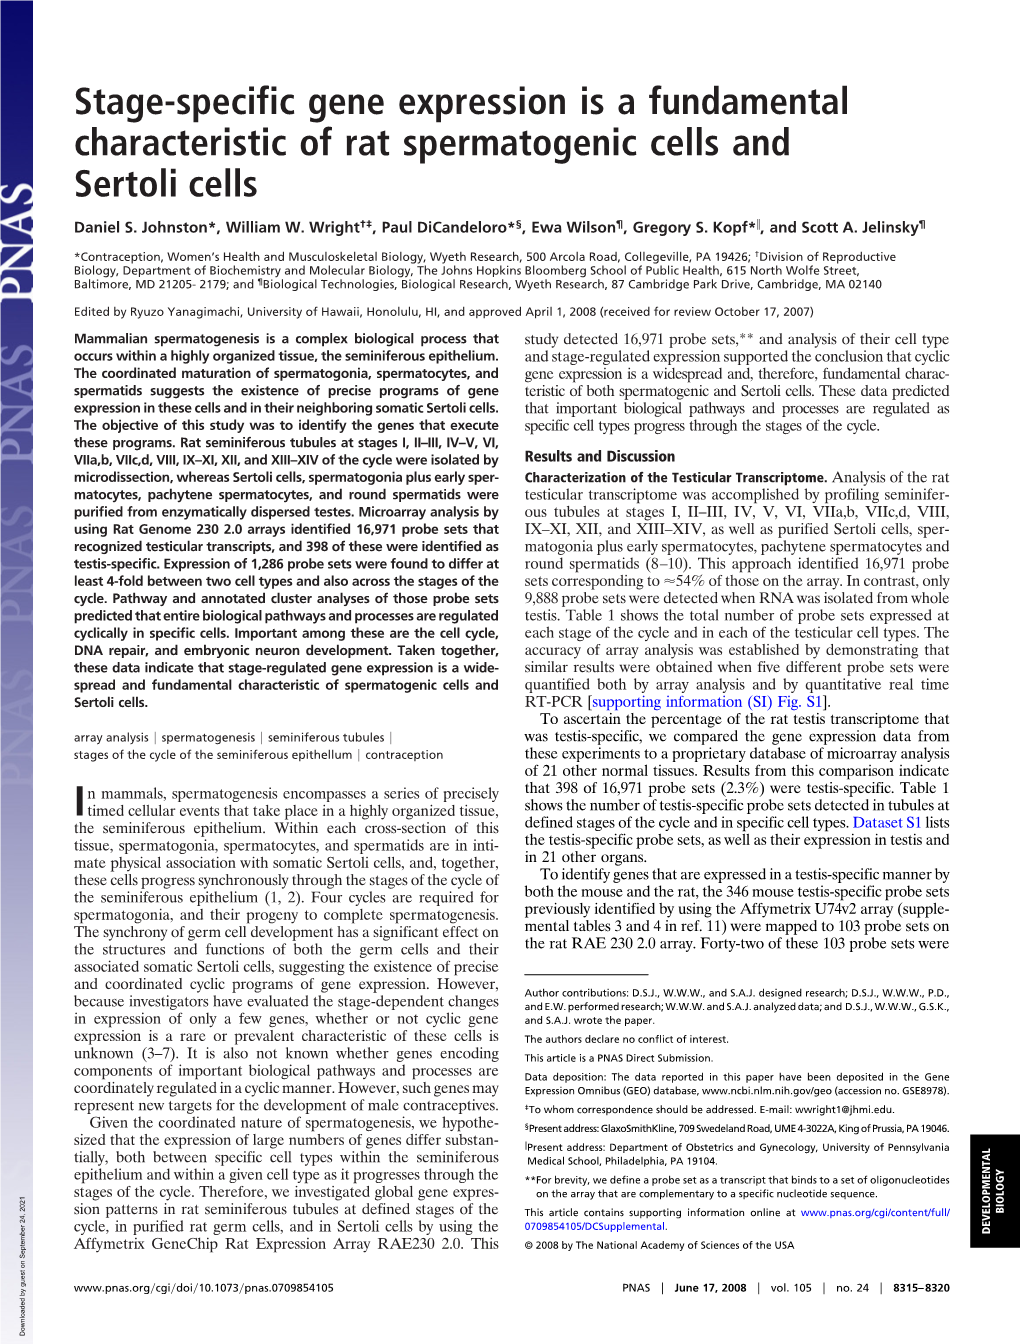 Stage-Specific Gene Expression Is a Fundamental Characteristic of Rat Spermatogenic Cells and Sertoli Cells